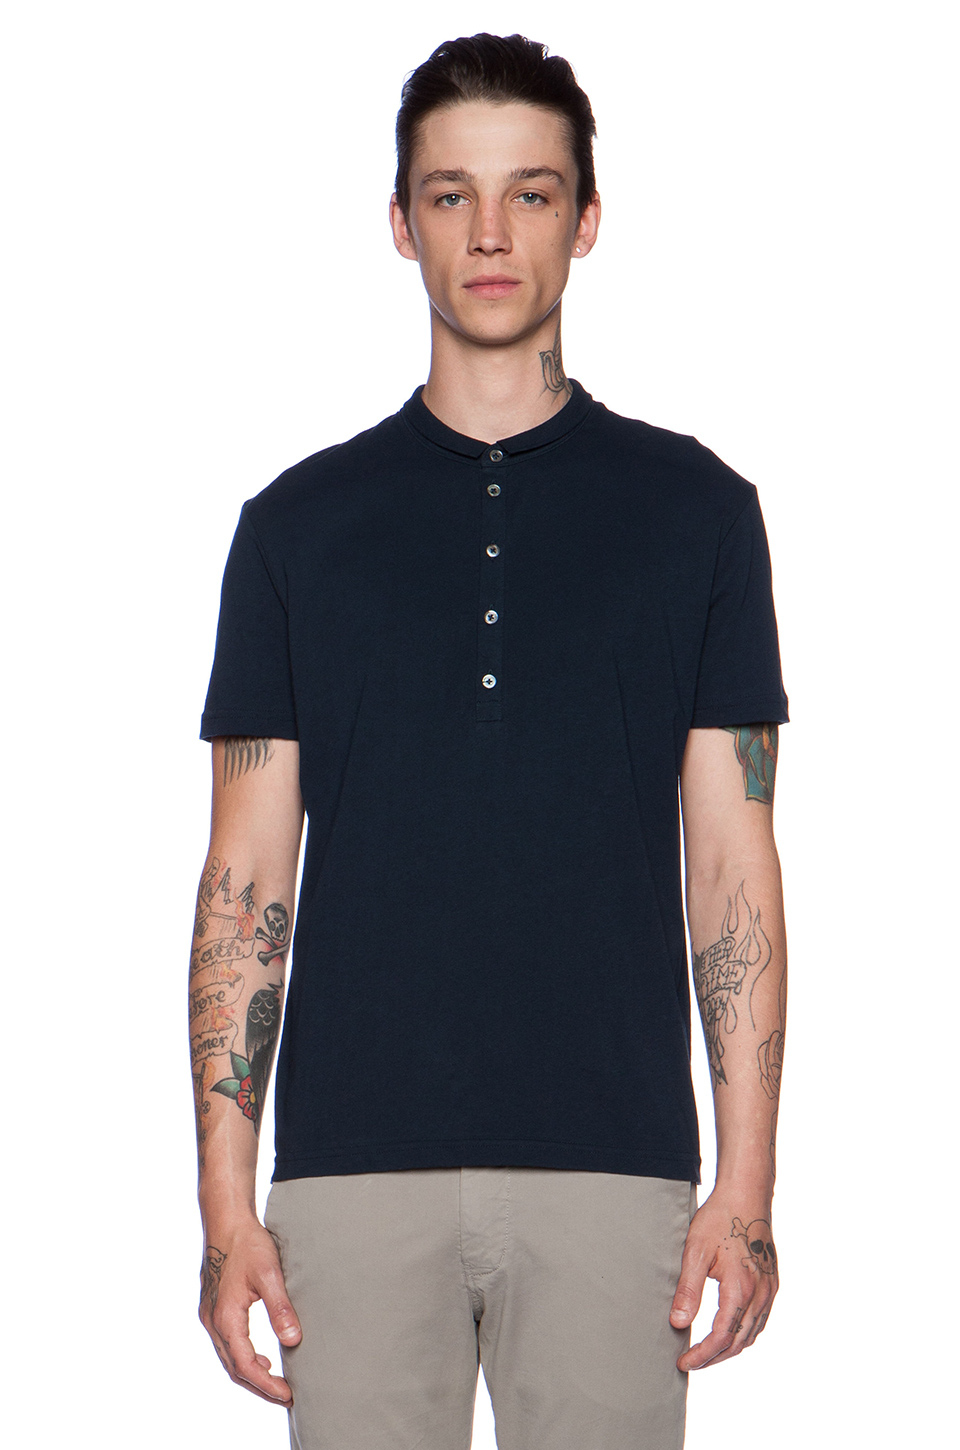 ATM Cotton Half Collar Polo in Navy (Blue) for Men - Lyst